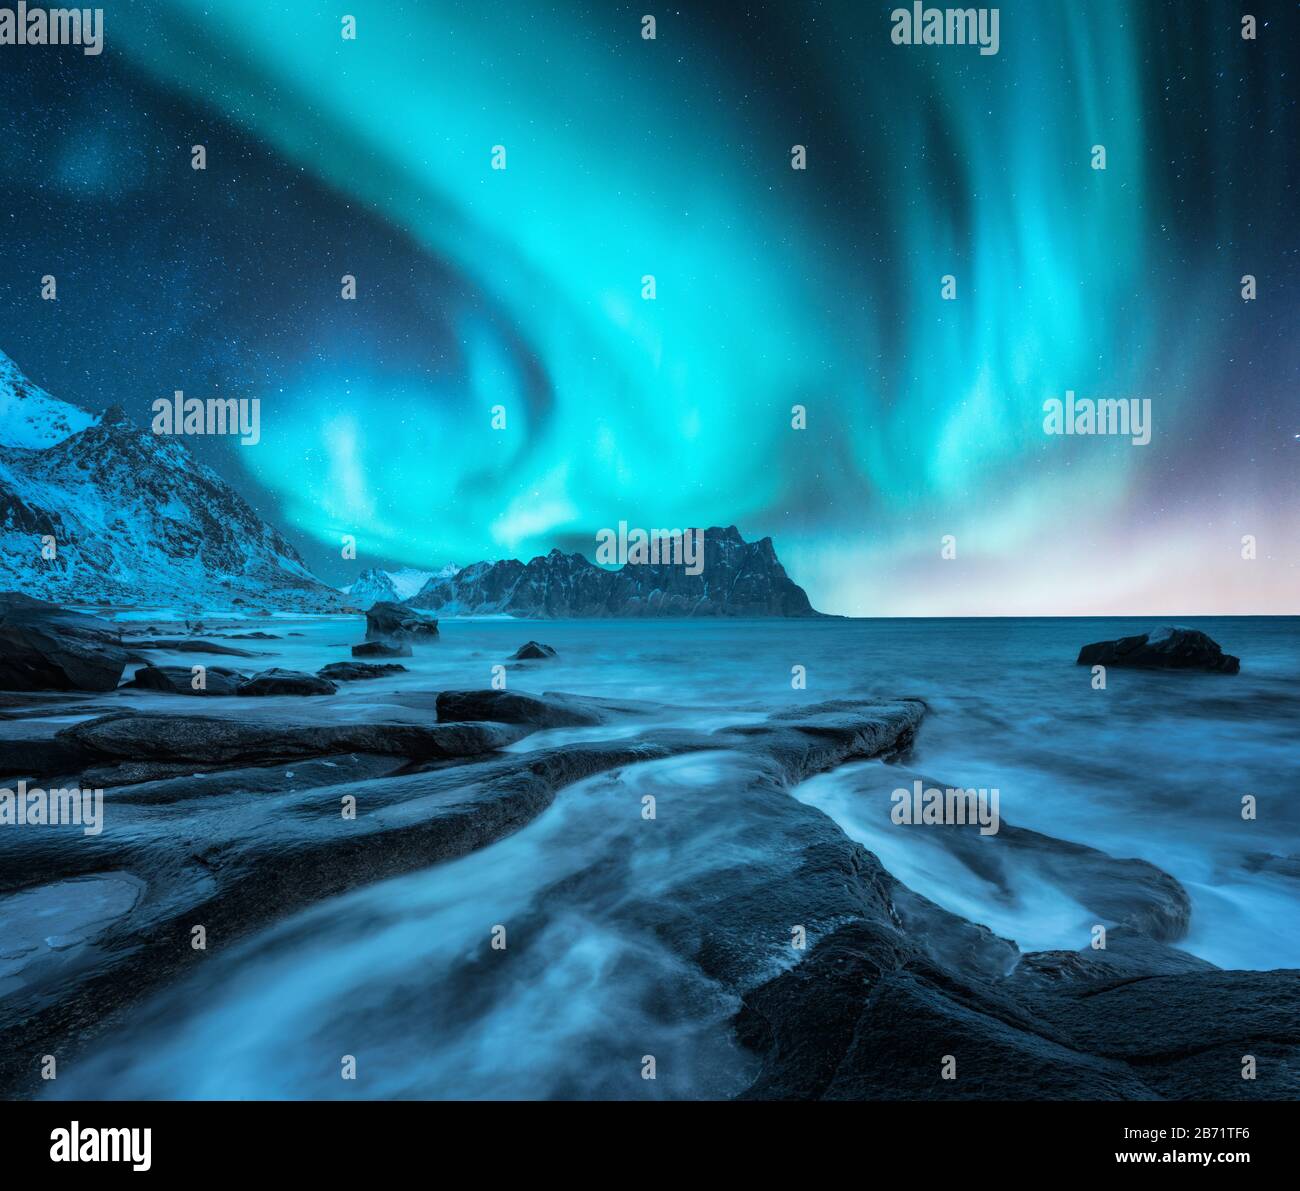 Northern lights over snowy mountain and sandy beach with stones Stock Photo